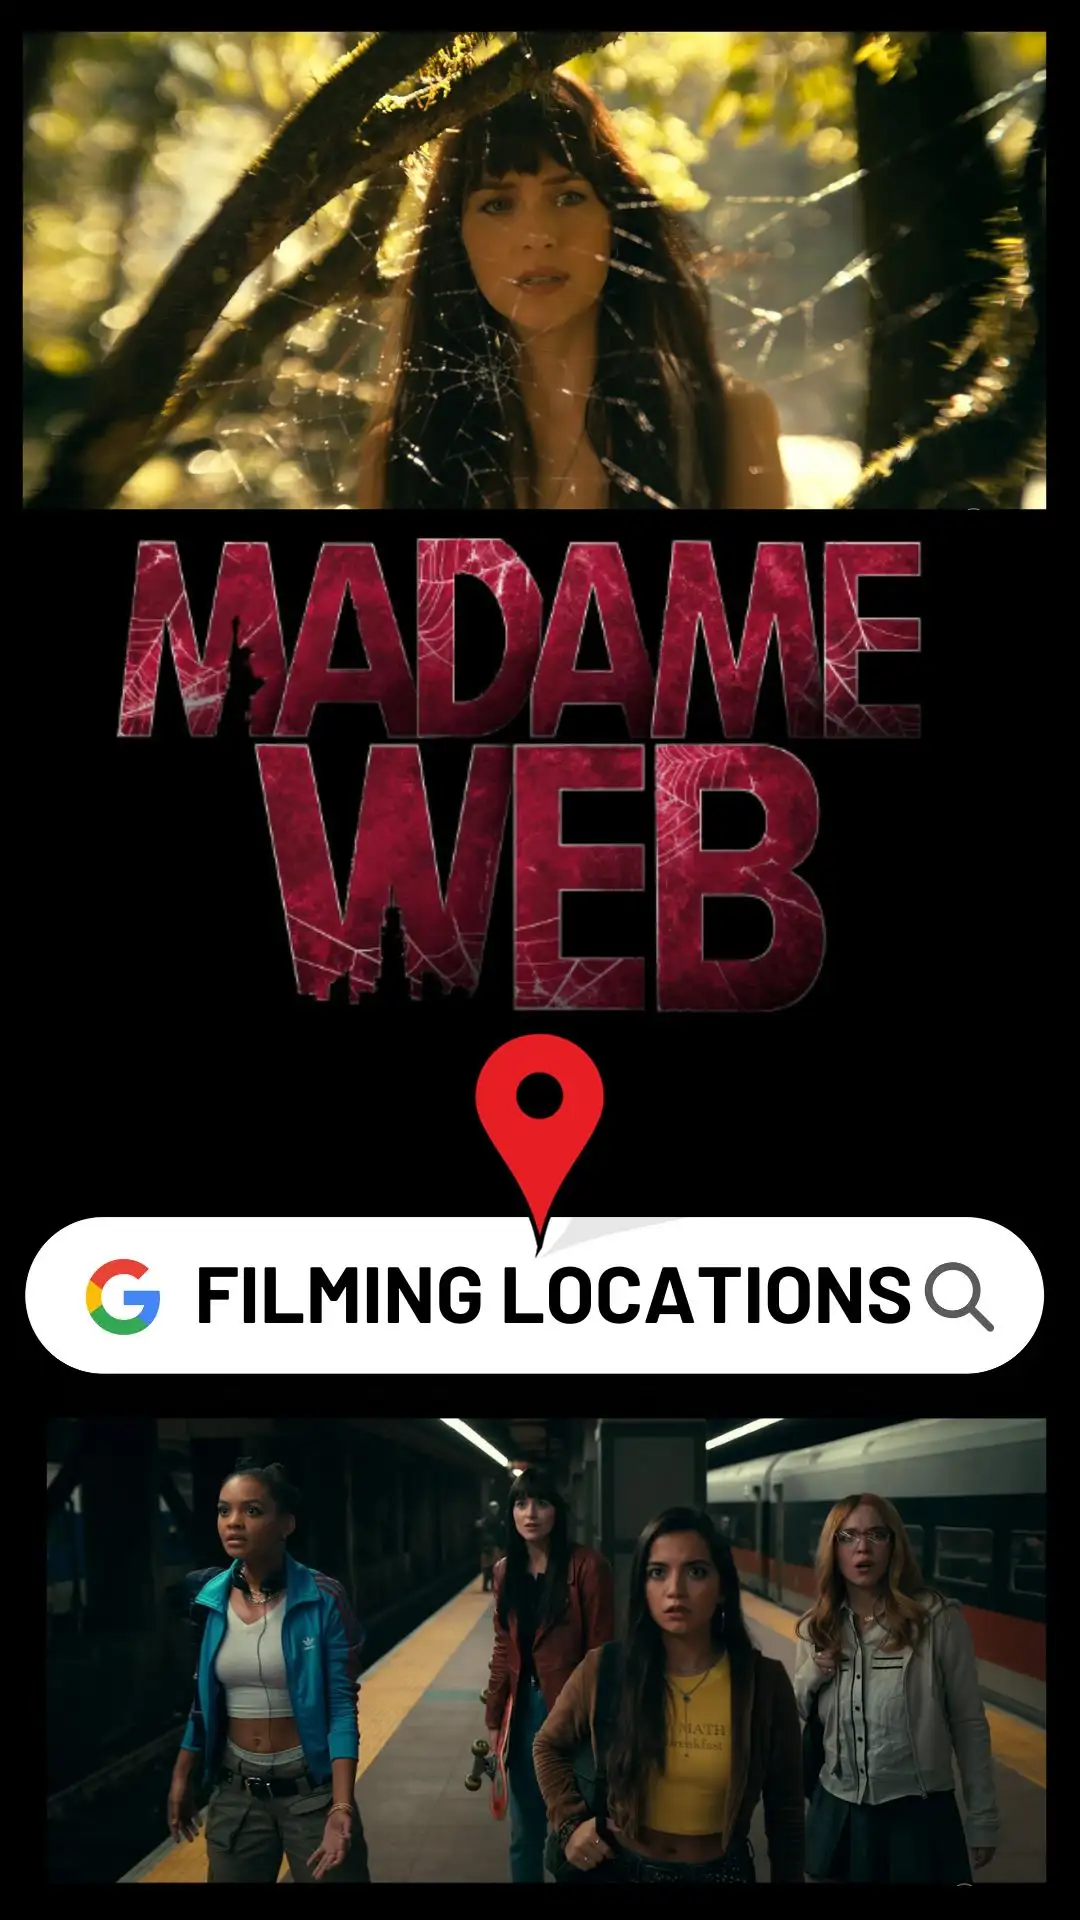 Madame Web Filming Locations